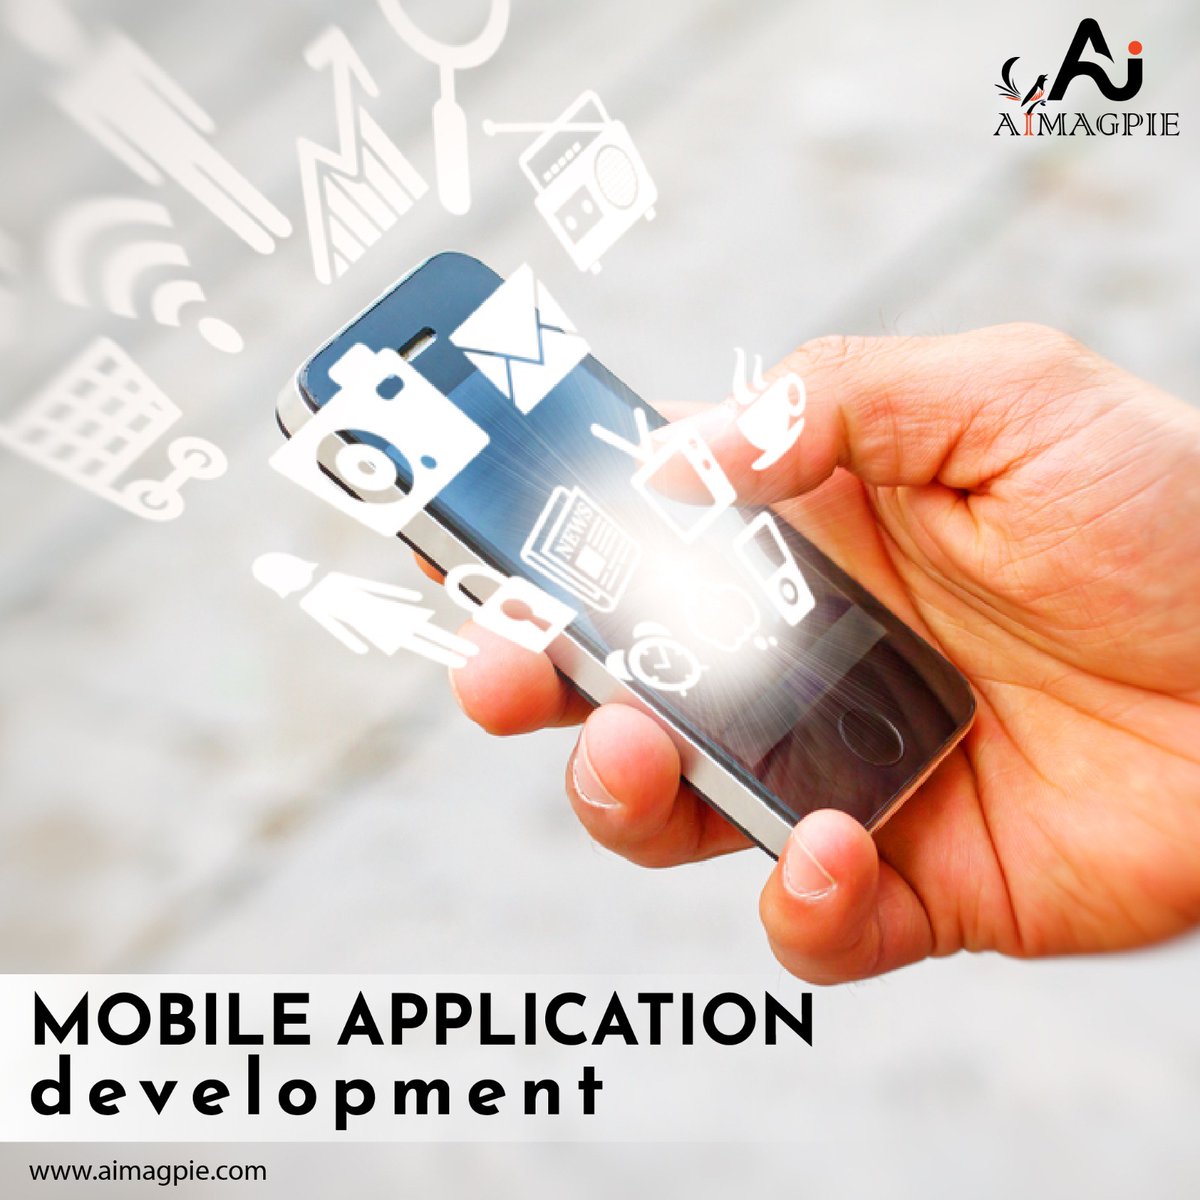 Transforming ideas into powerful mobile experiences. Our team of skilled developers and designers are ready to turn your visions into reality.
.
.

#mobileapplicationdevelopment #aimagpie #mobileappdesign